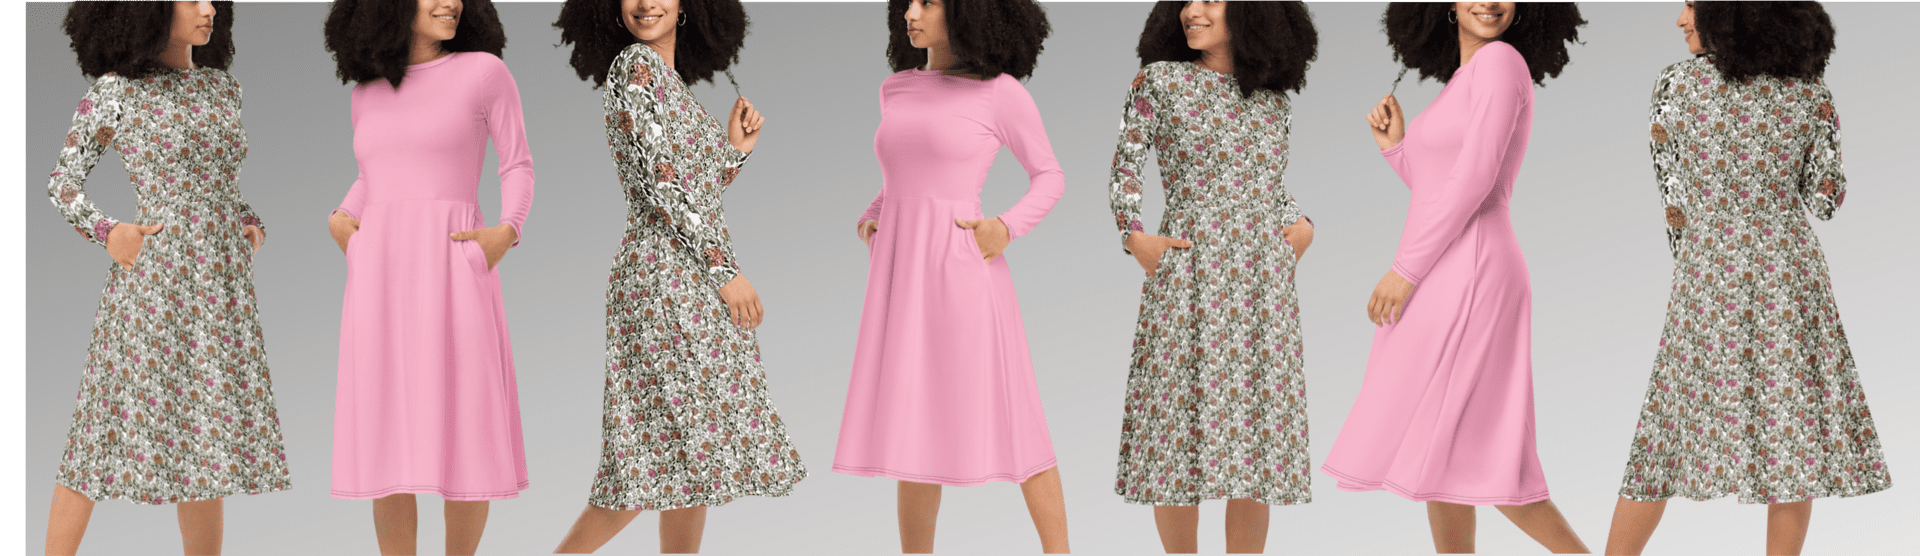 Pink and floral patterned dresses with pockets.